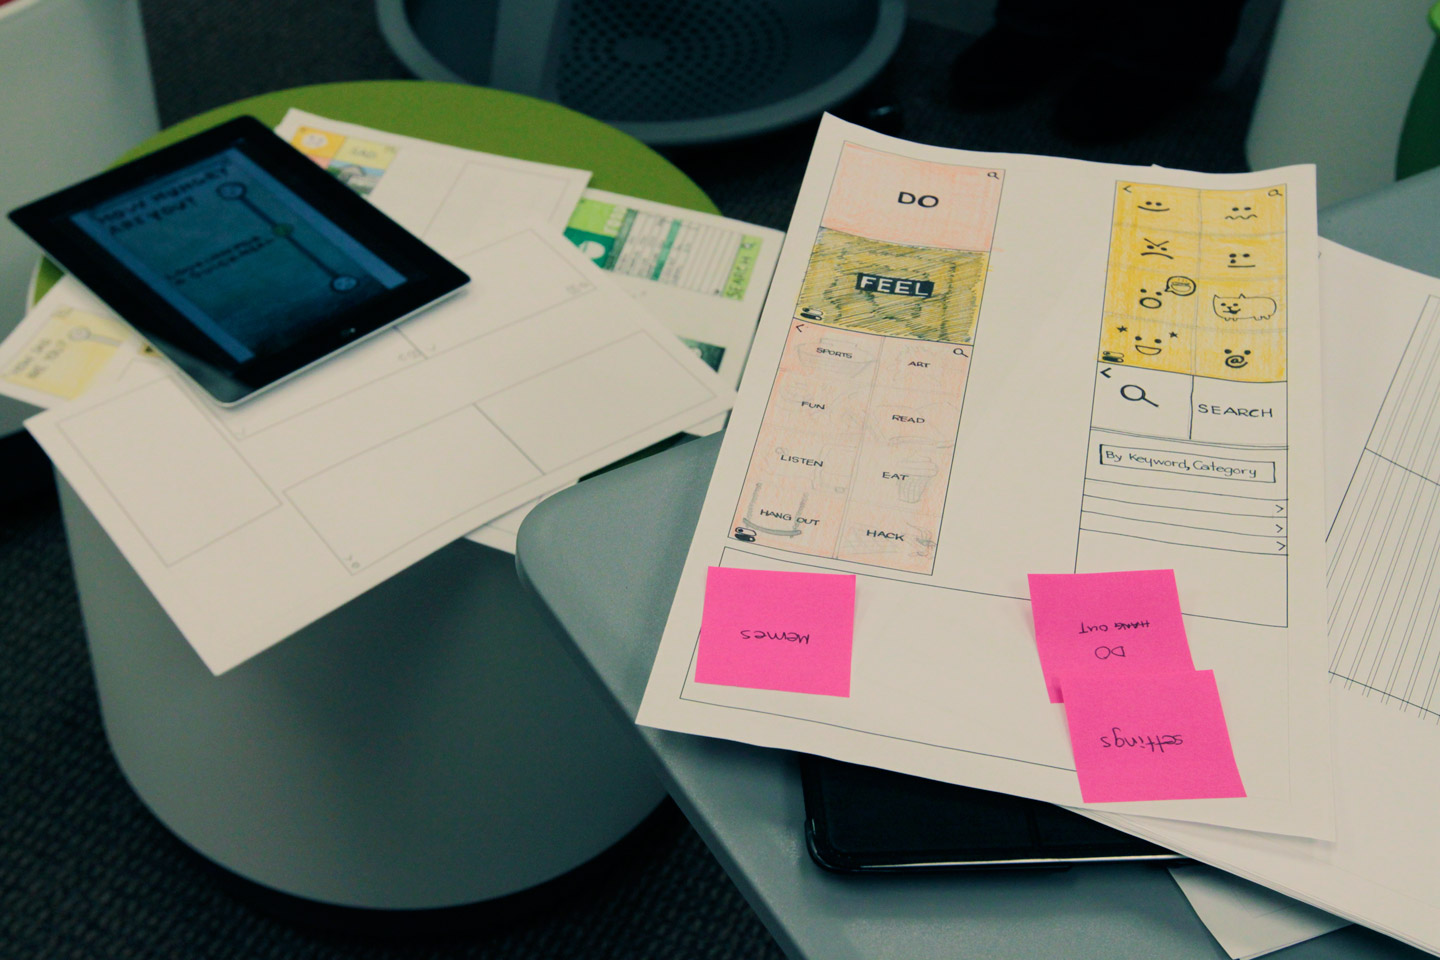 Sketches of app layouts and an iPad sitting on stools